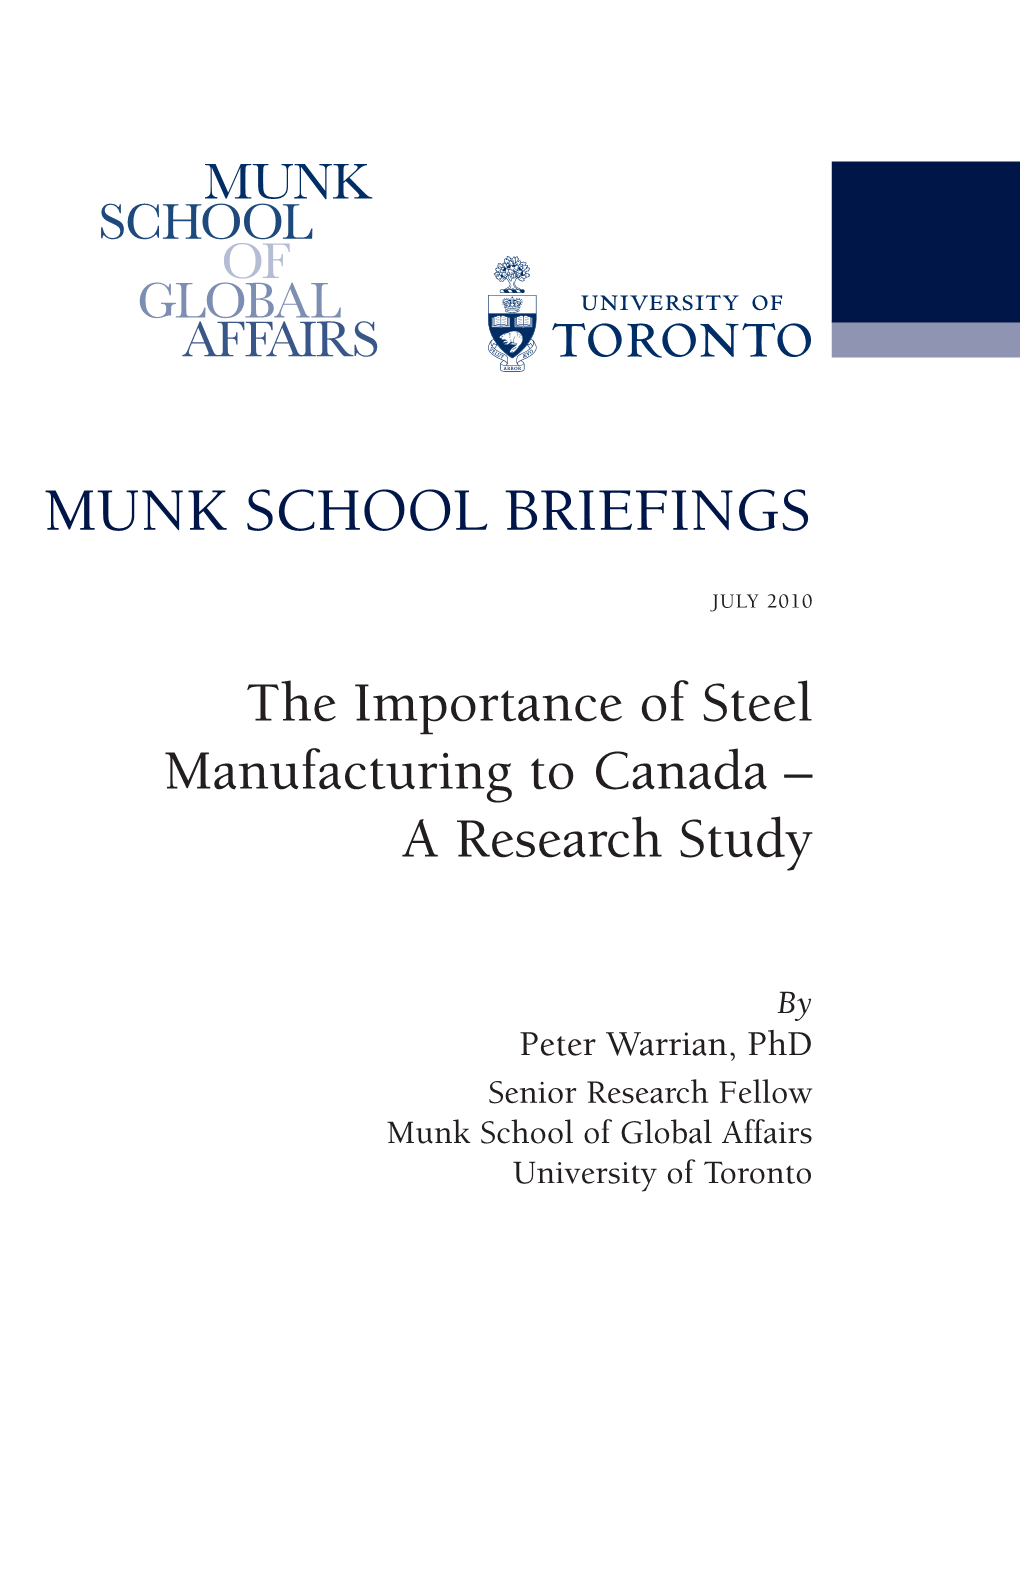 The Importance of Steel Manufacturing to Canada – a Research Study